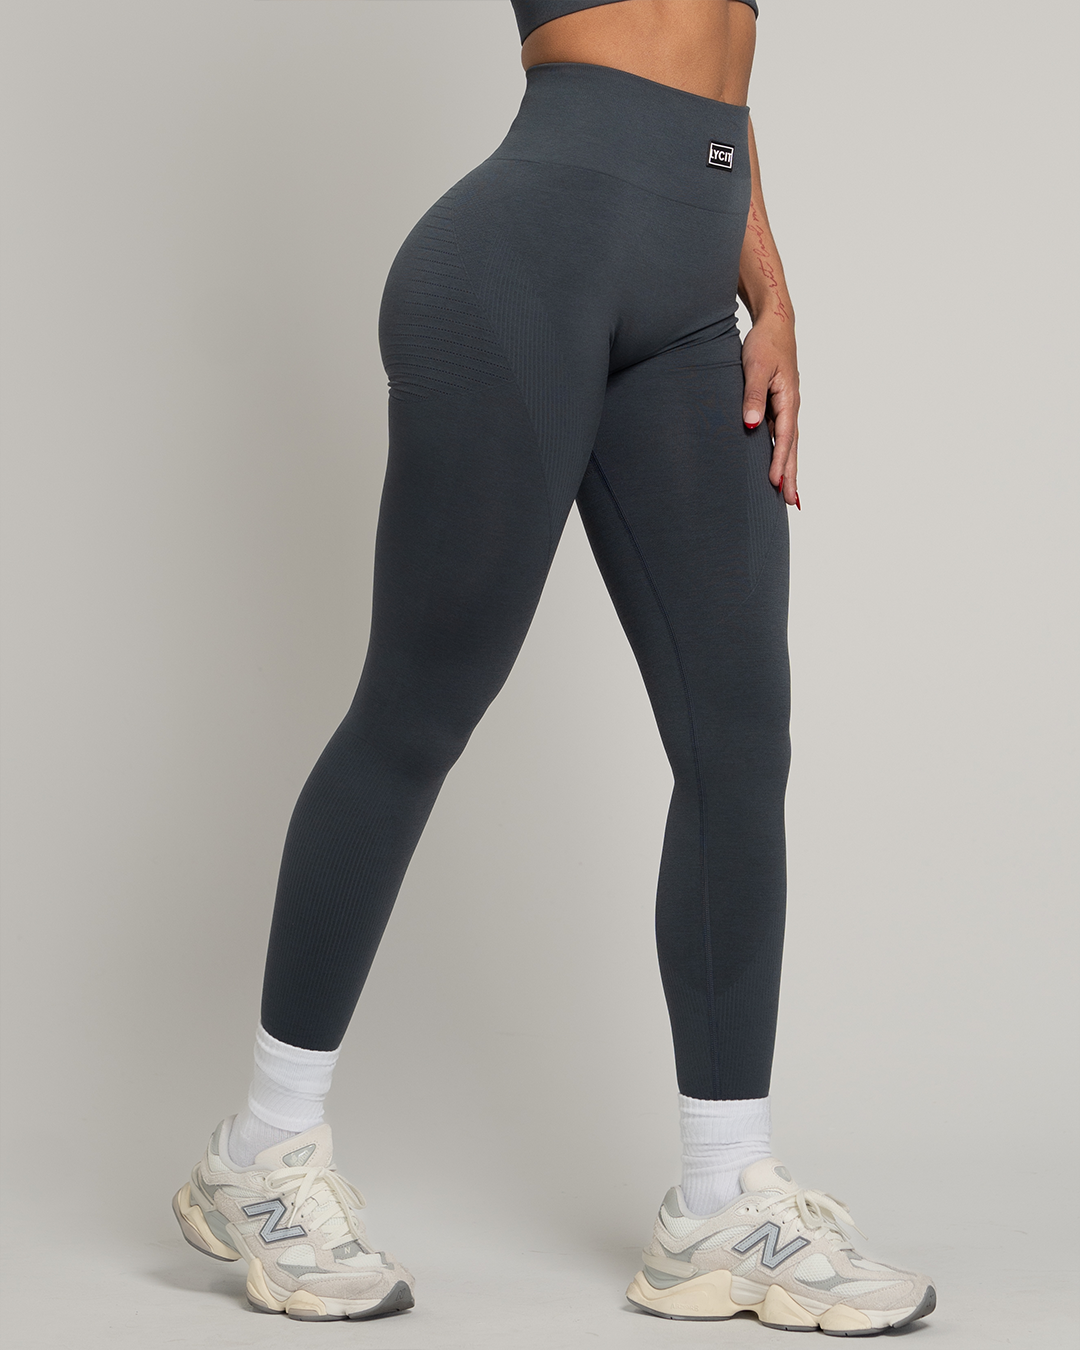 Gymshark Fit Seamless Legging ONLY in charcoal gray, Women's